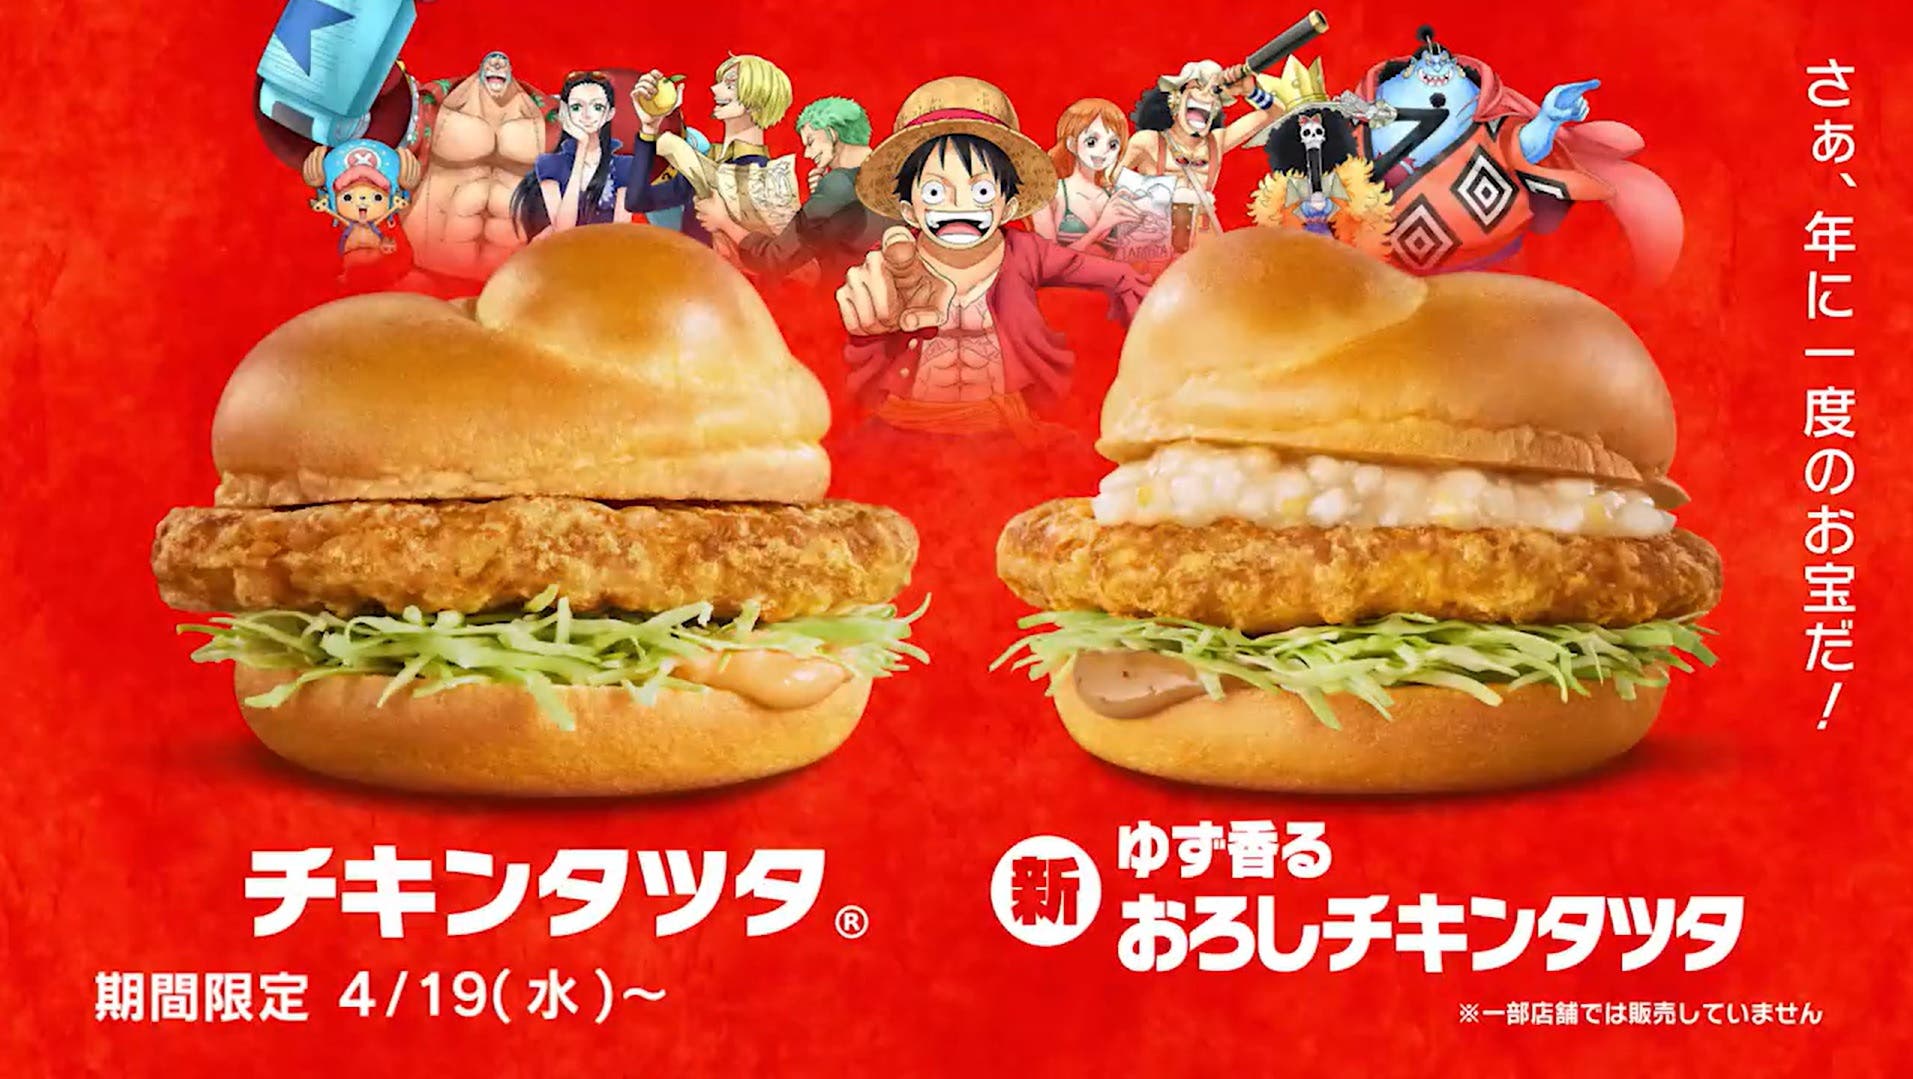 One Piece Announces Collaboration With McDonald's, And You Can't Miss